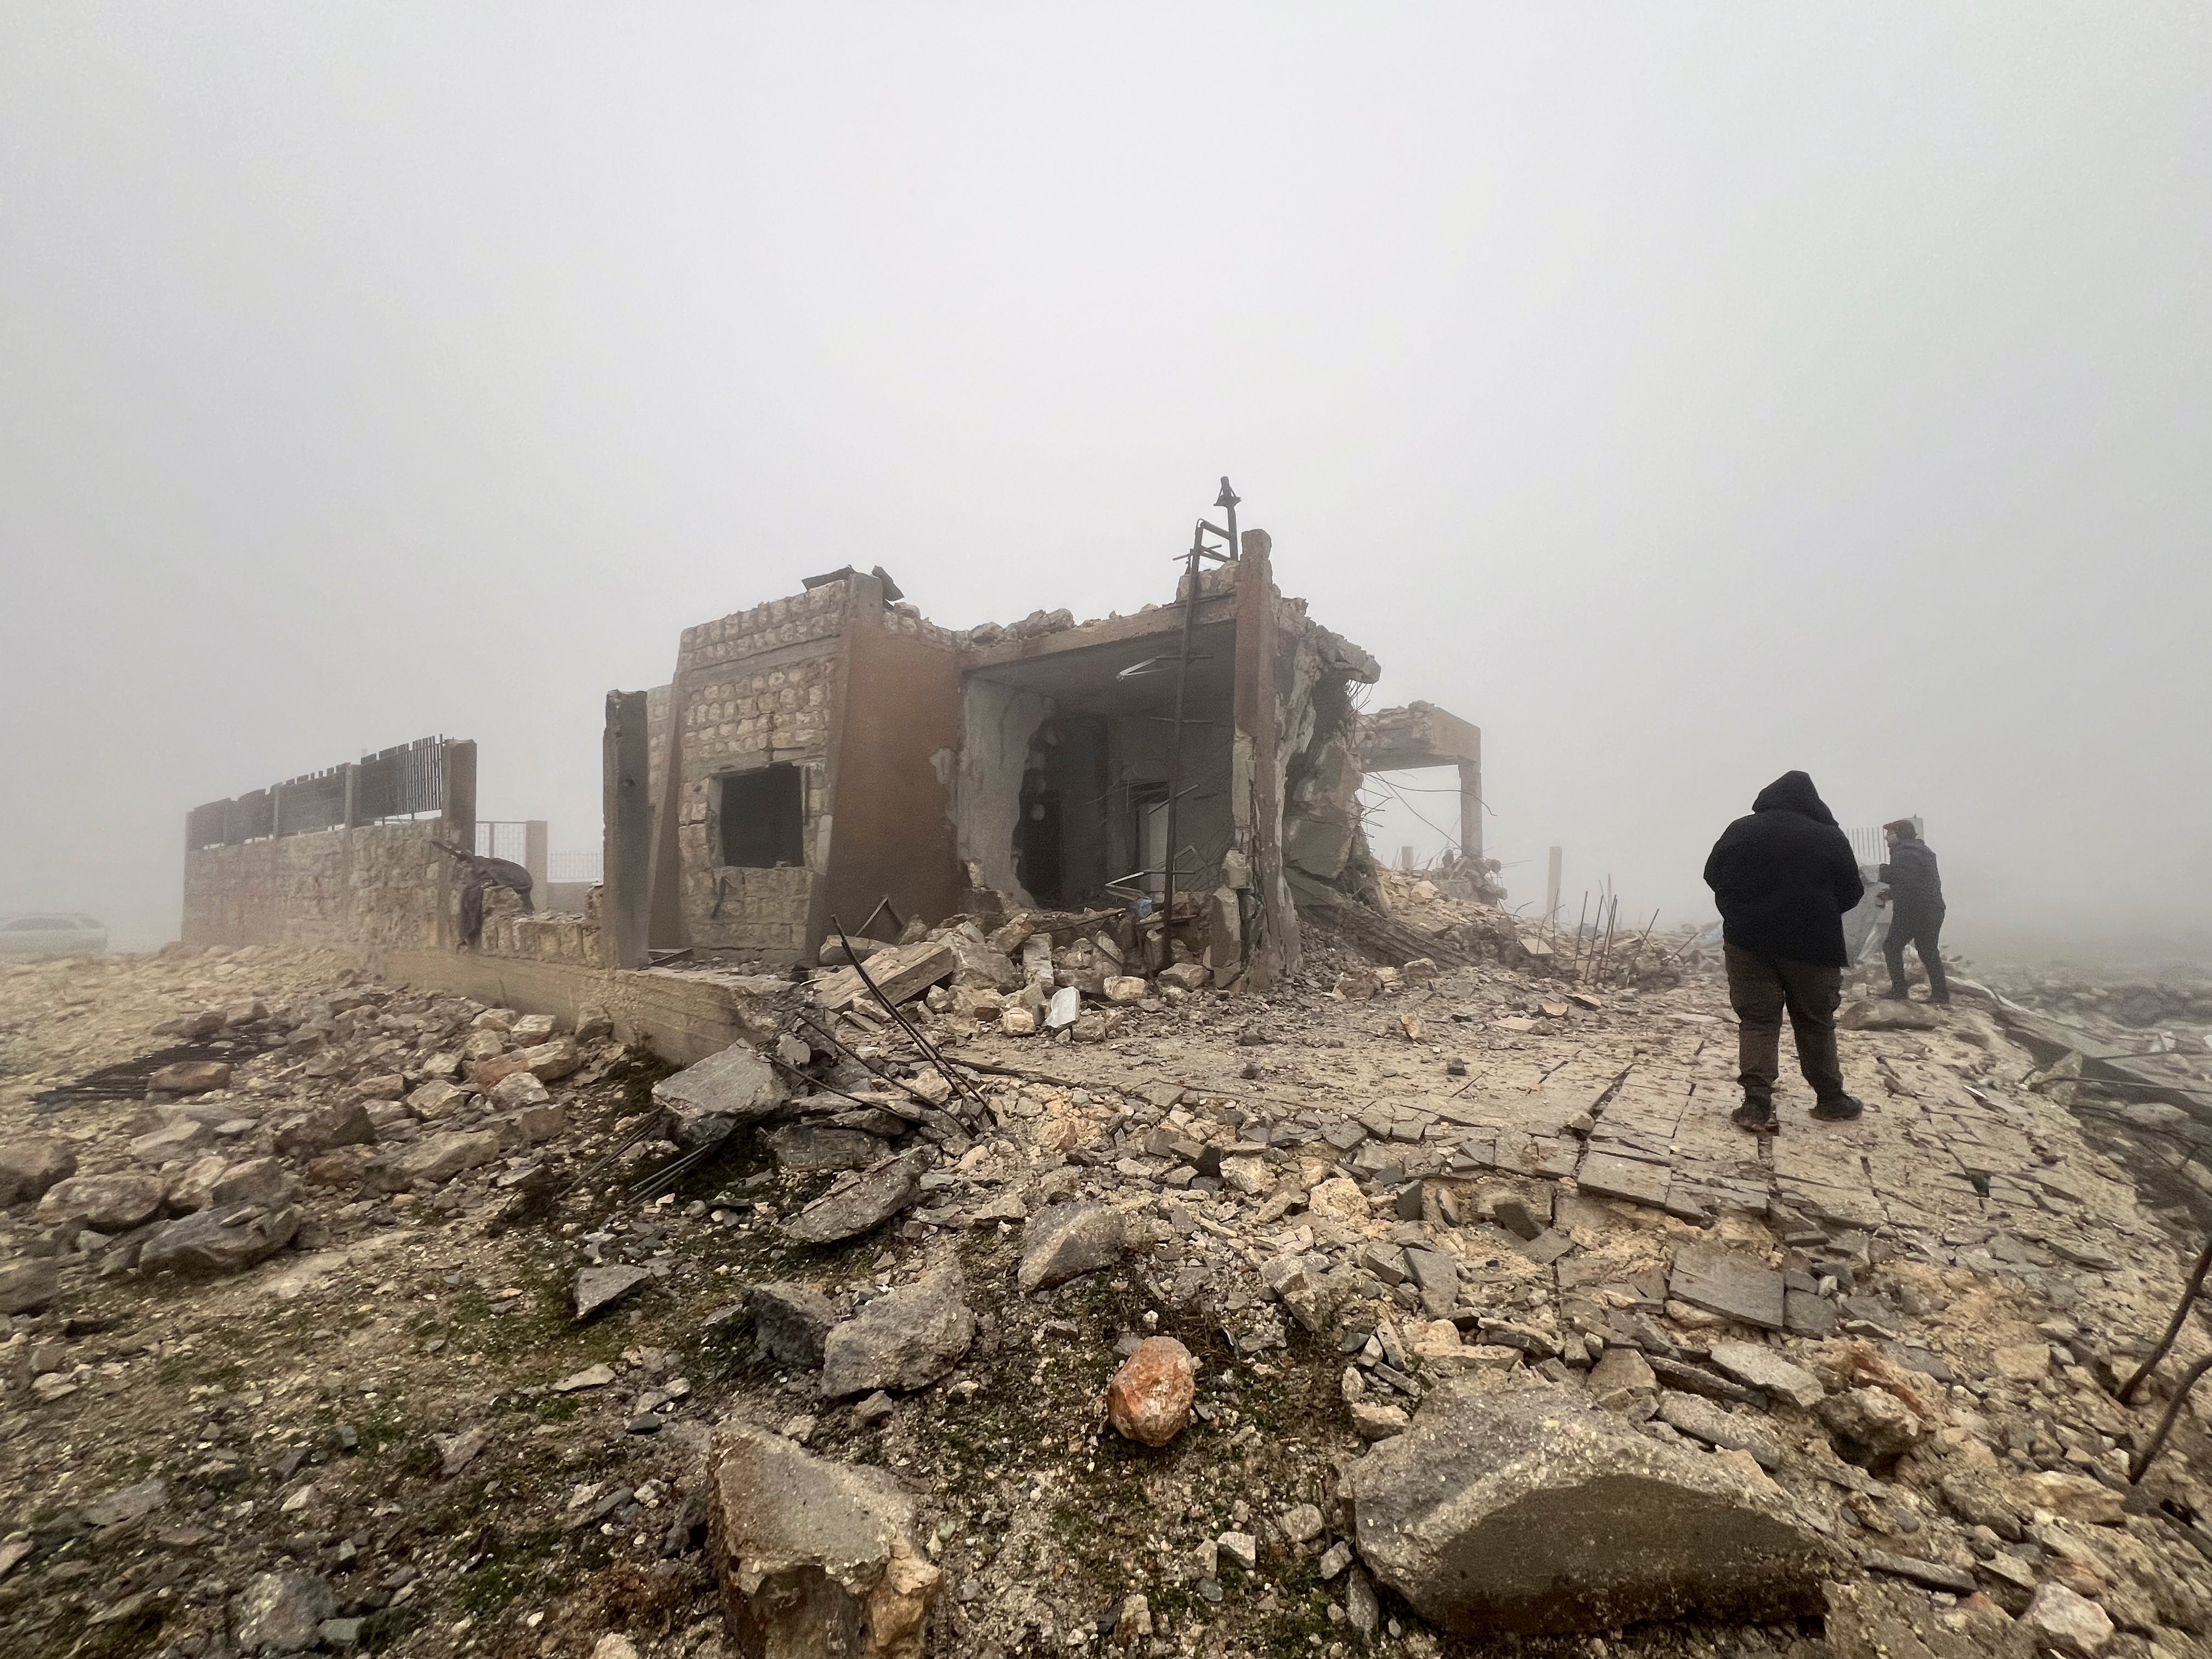 Syrians at an abandoned medical facility hit by Iran missiles in the village of Talteta